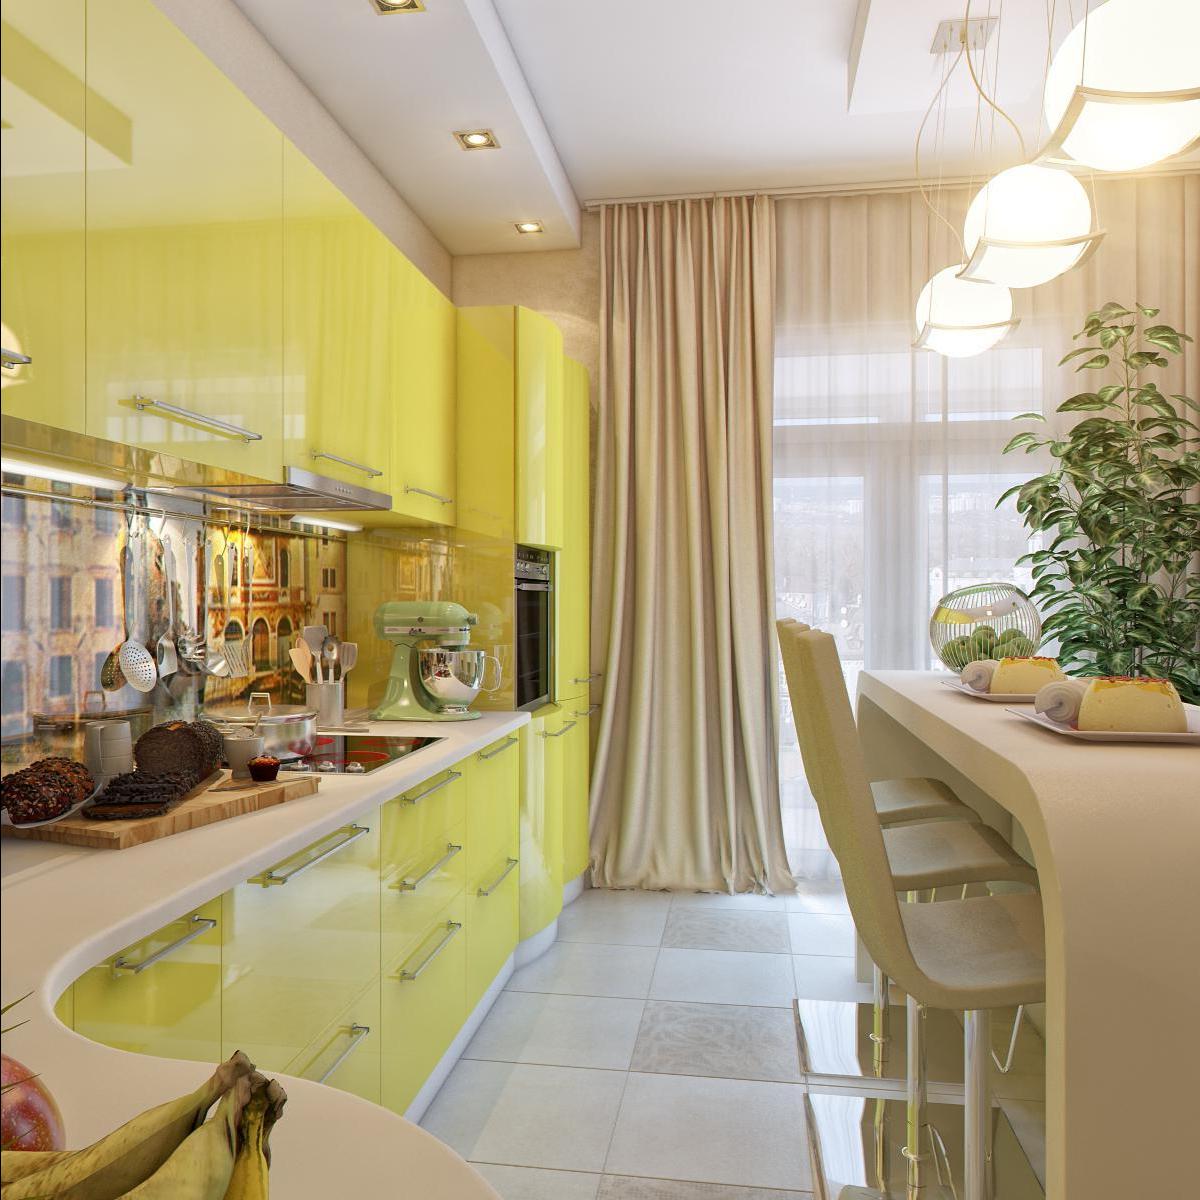 Interior of a small kitchen-living room in bright color